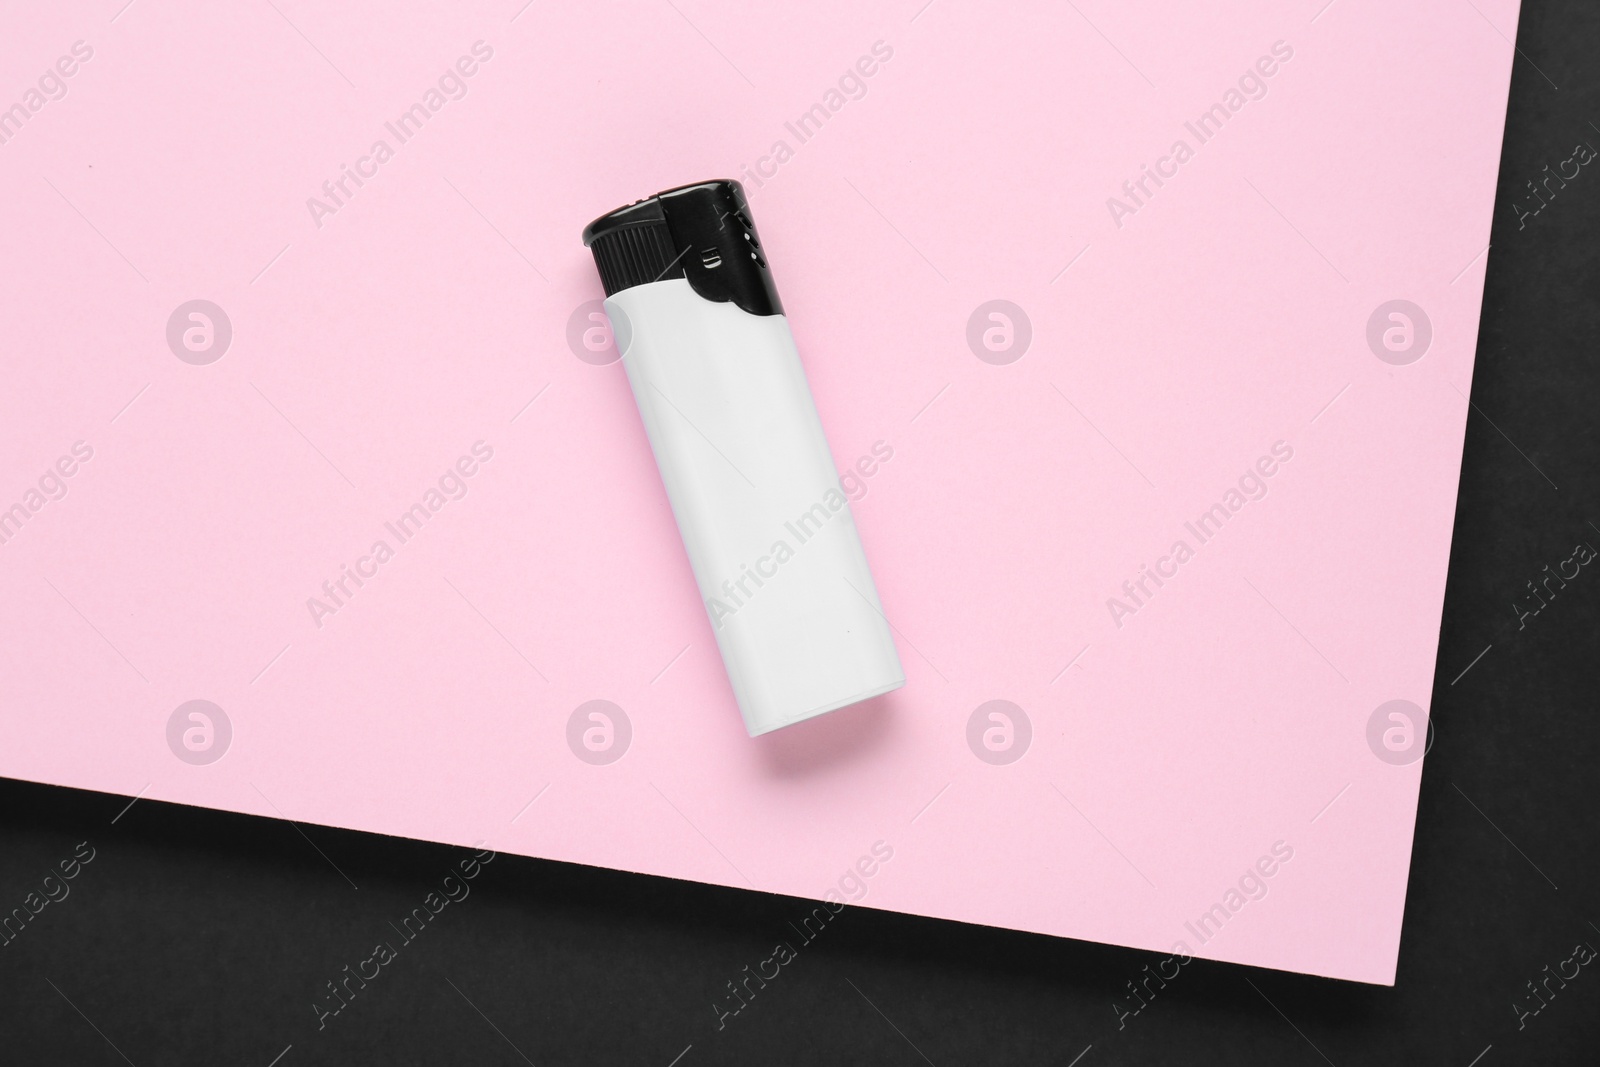 Photo of Stylish small pocket lighter on color background, top view